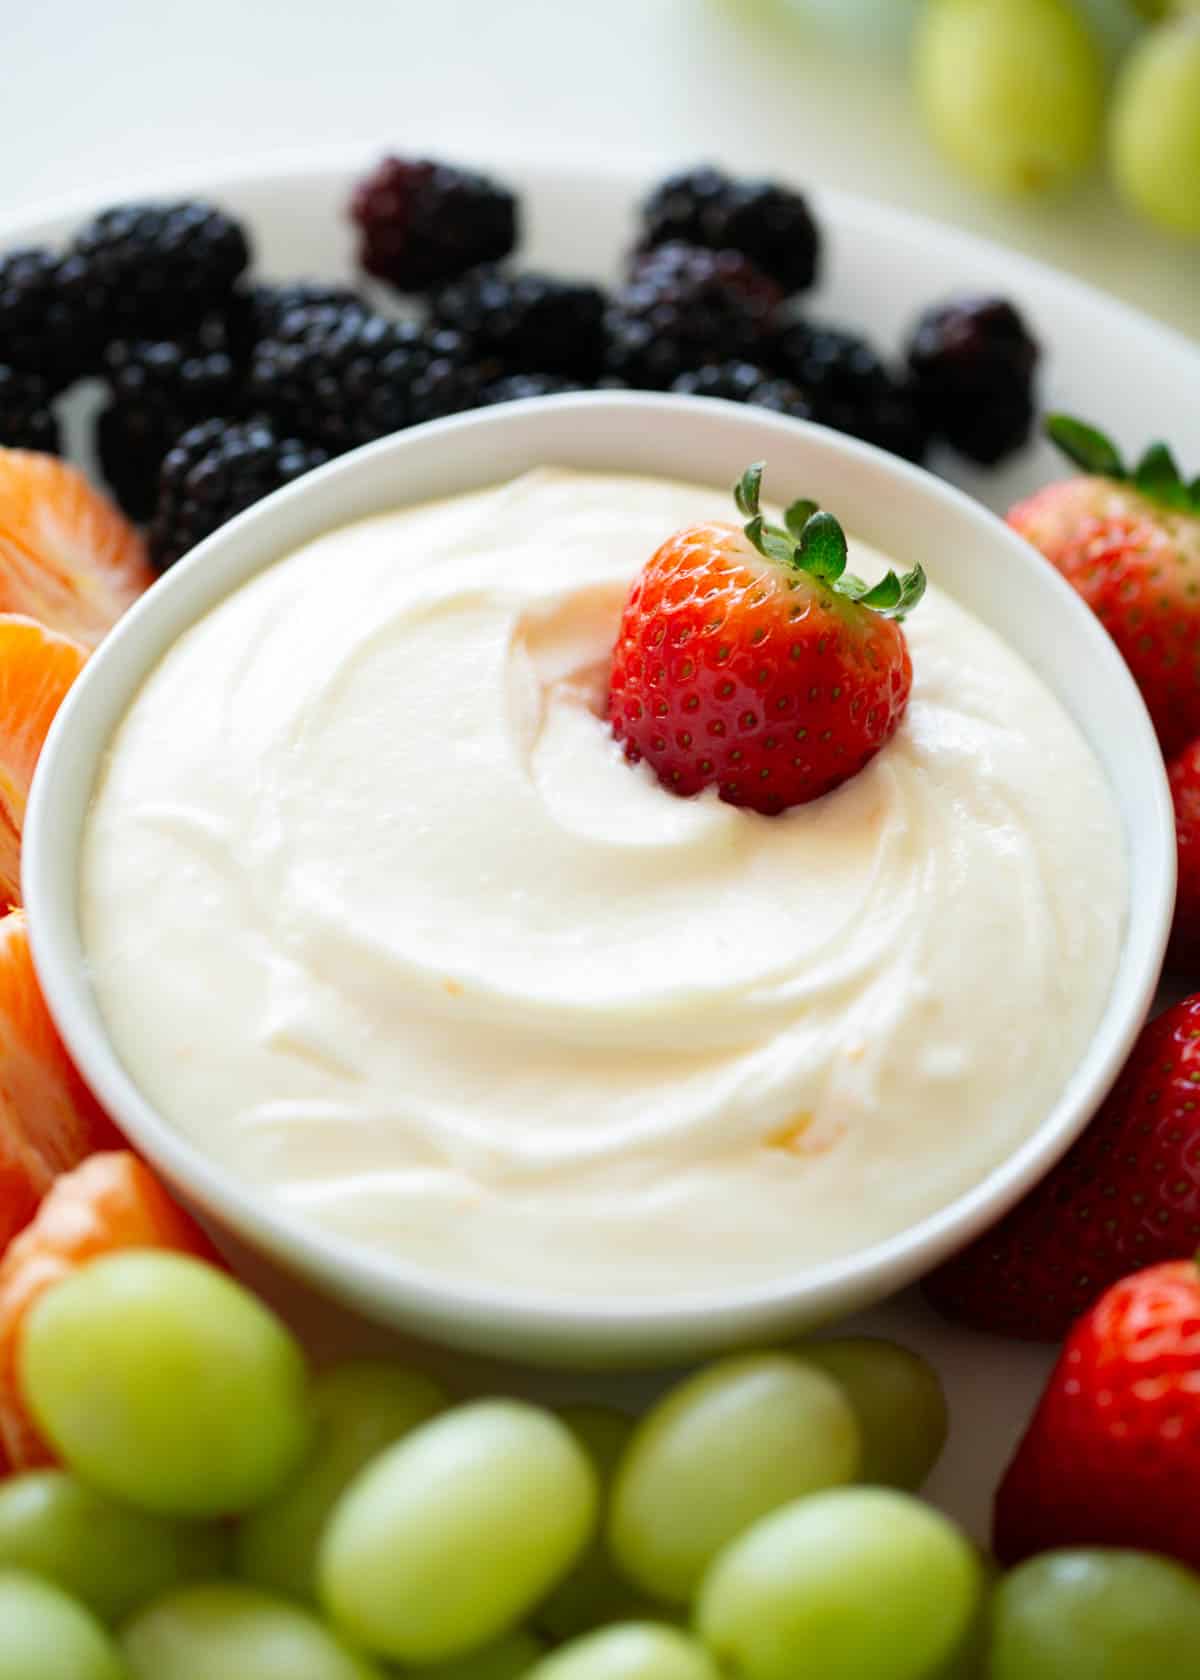 Fruit dip on a plate.